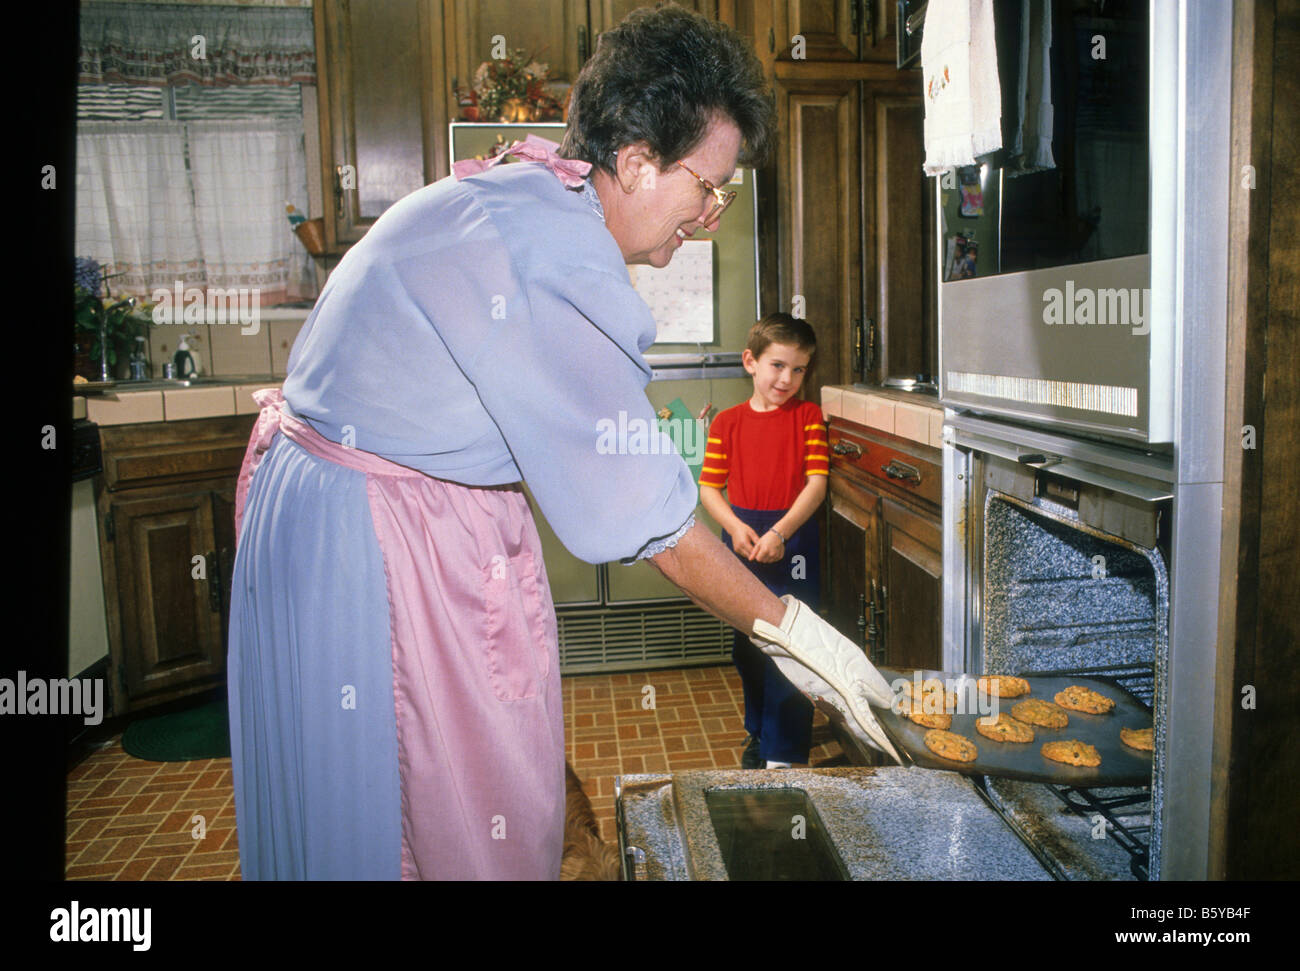 Grandmother bakes cookies for grandson Stock Photo